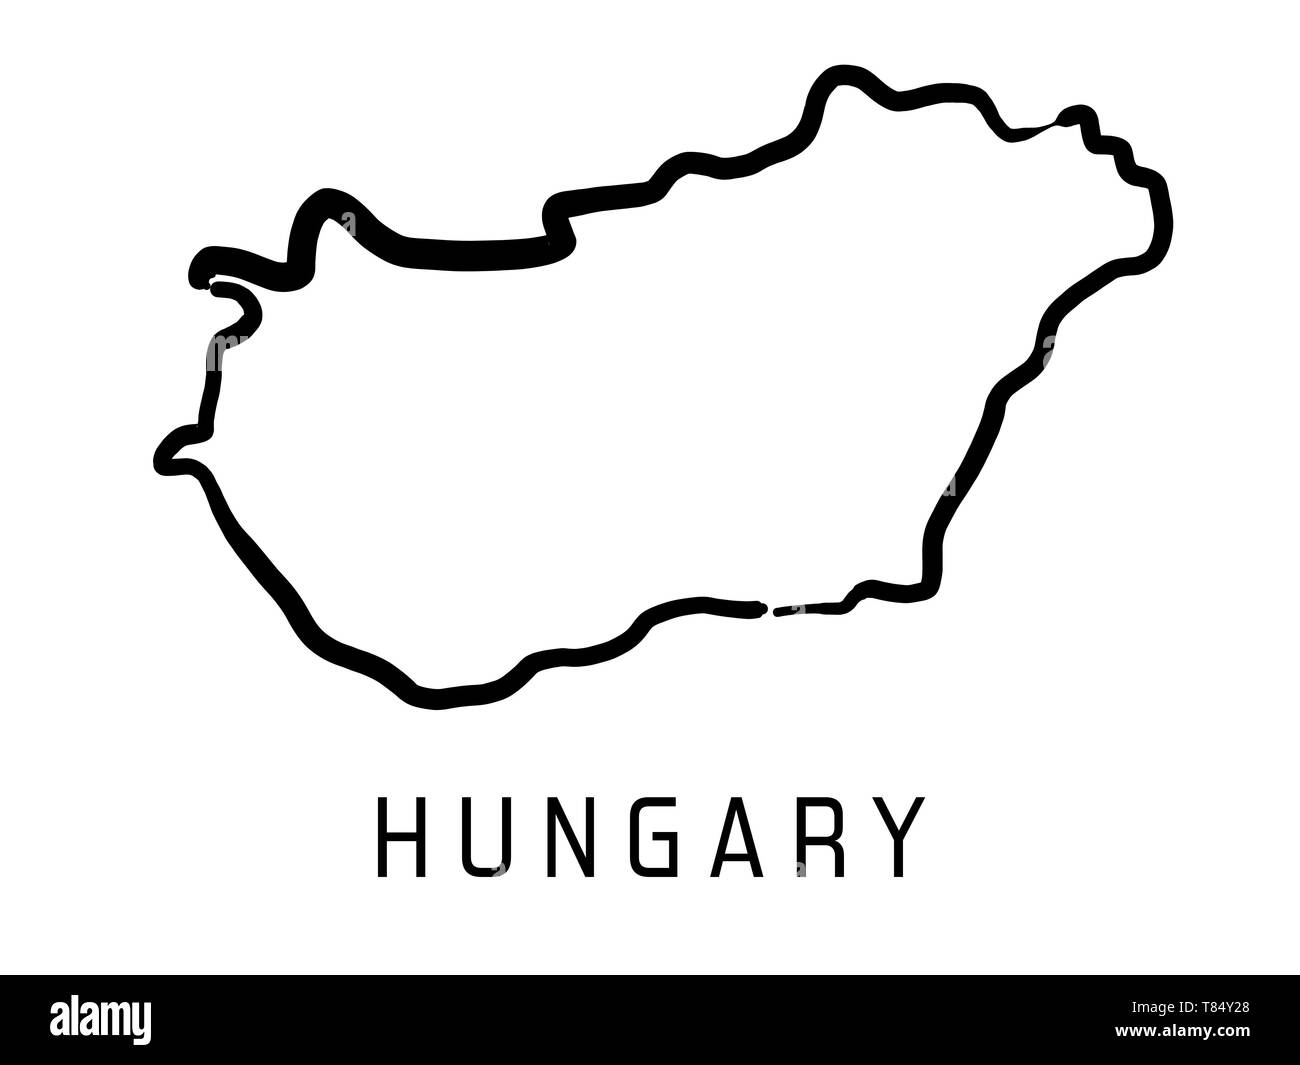 https://c8.alamy.com/comp/T84Y28/hungary-map-outline-smooth-country-shape-map-vector-T84Y28.jpg